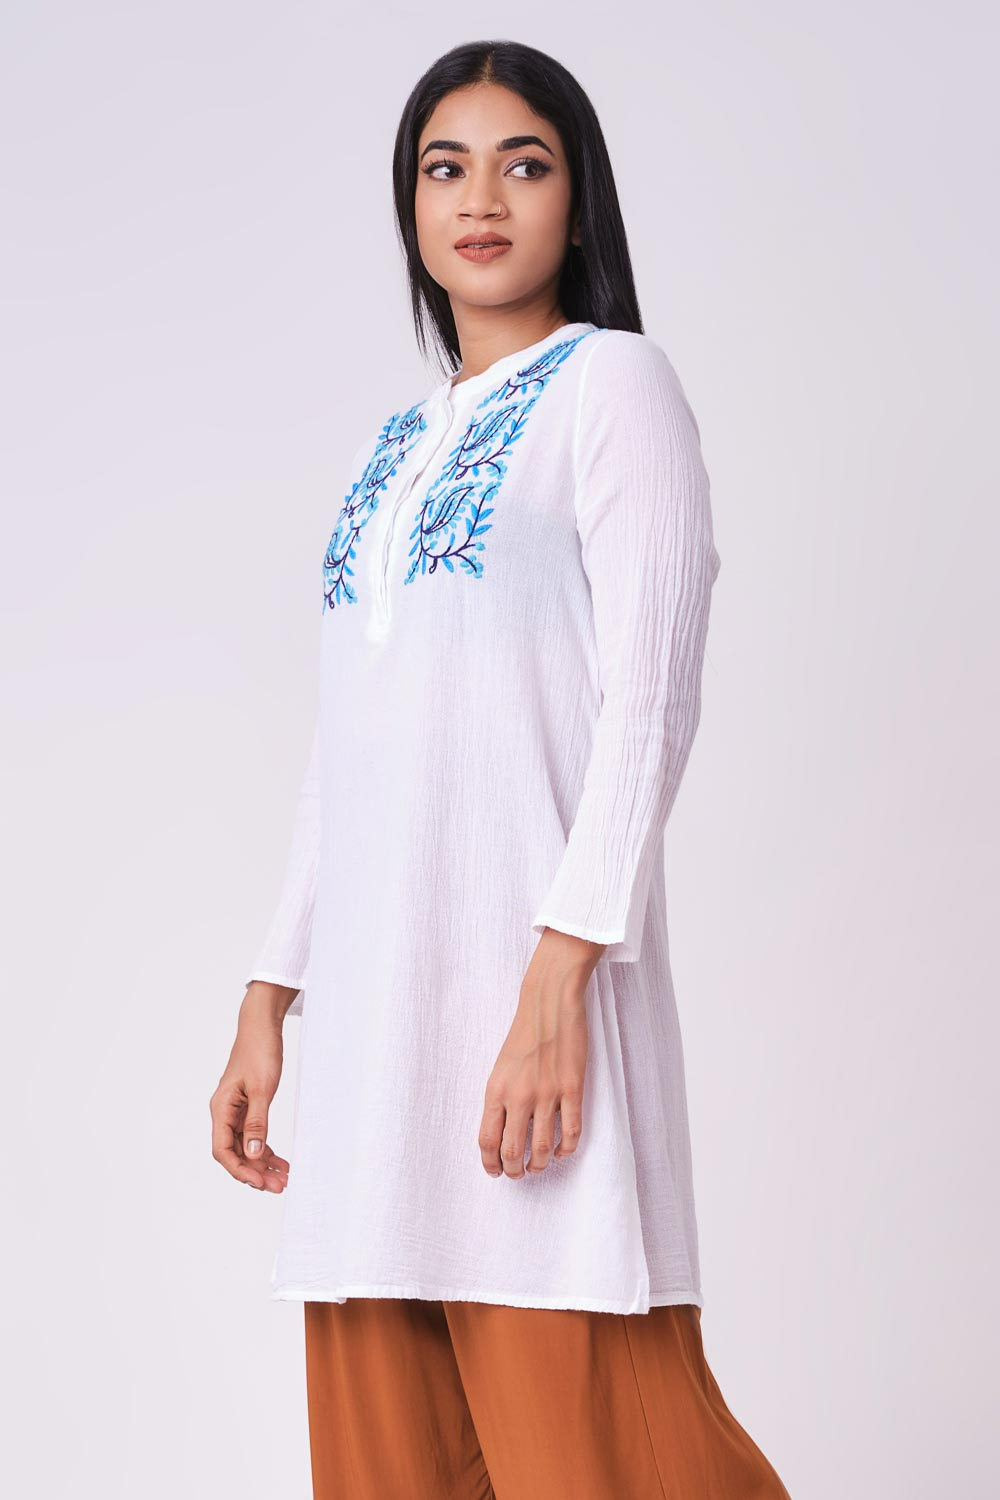 Odel White Long Sleeve Tunic Top